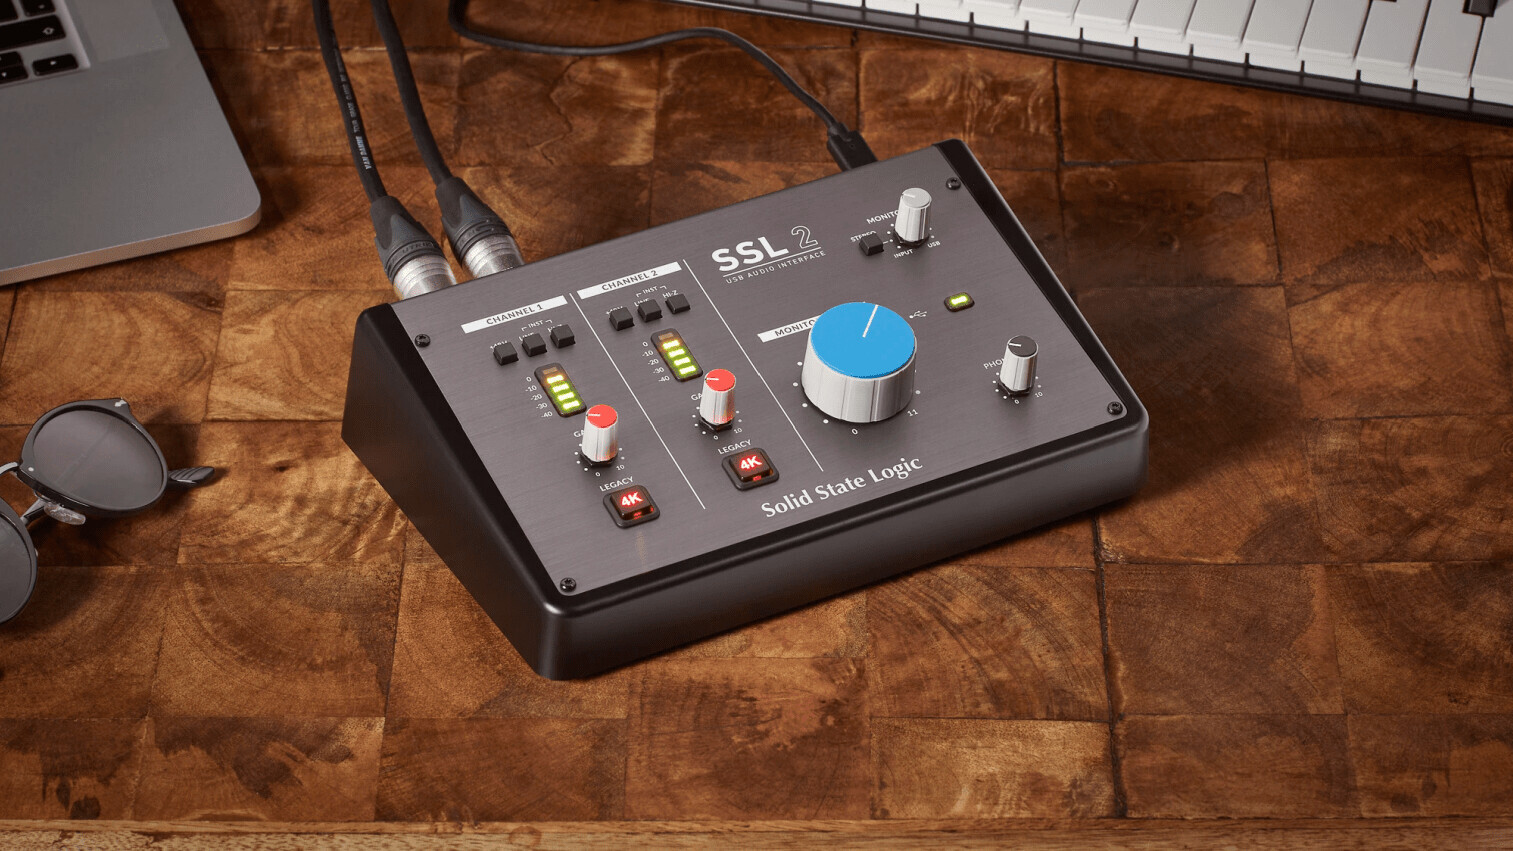 Solid State Logic enters the home studio with a budget audio interface